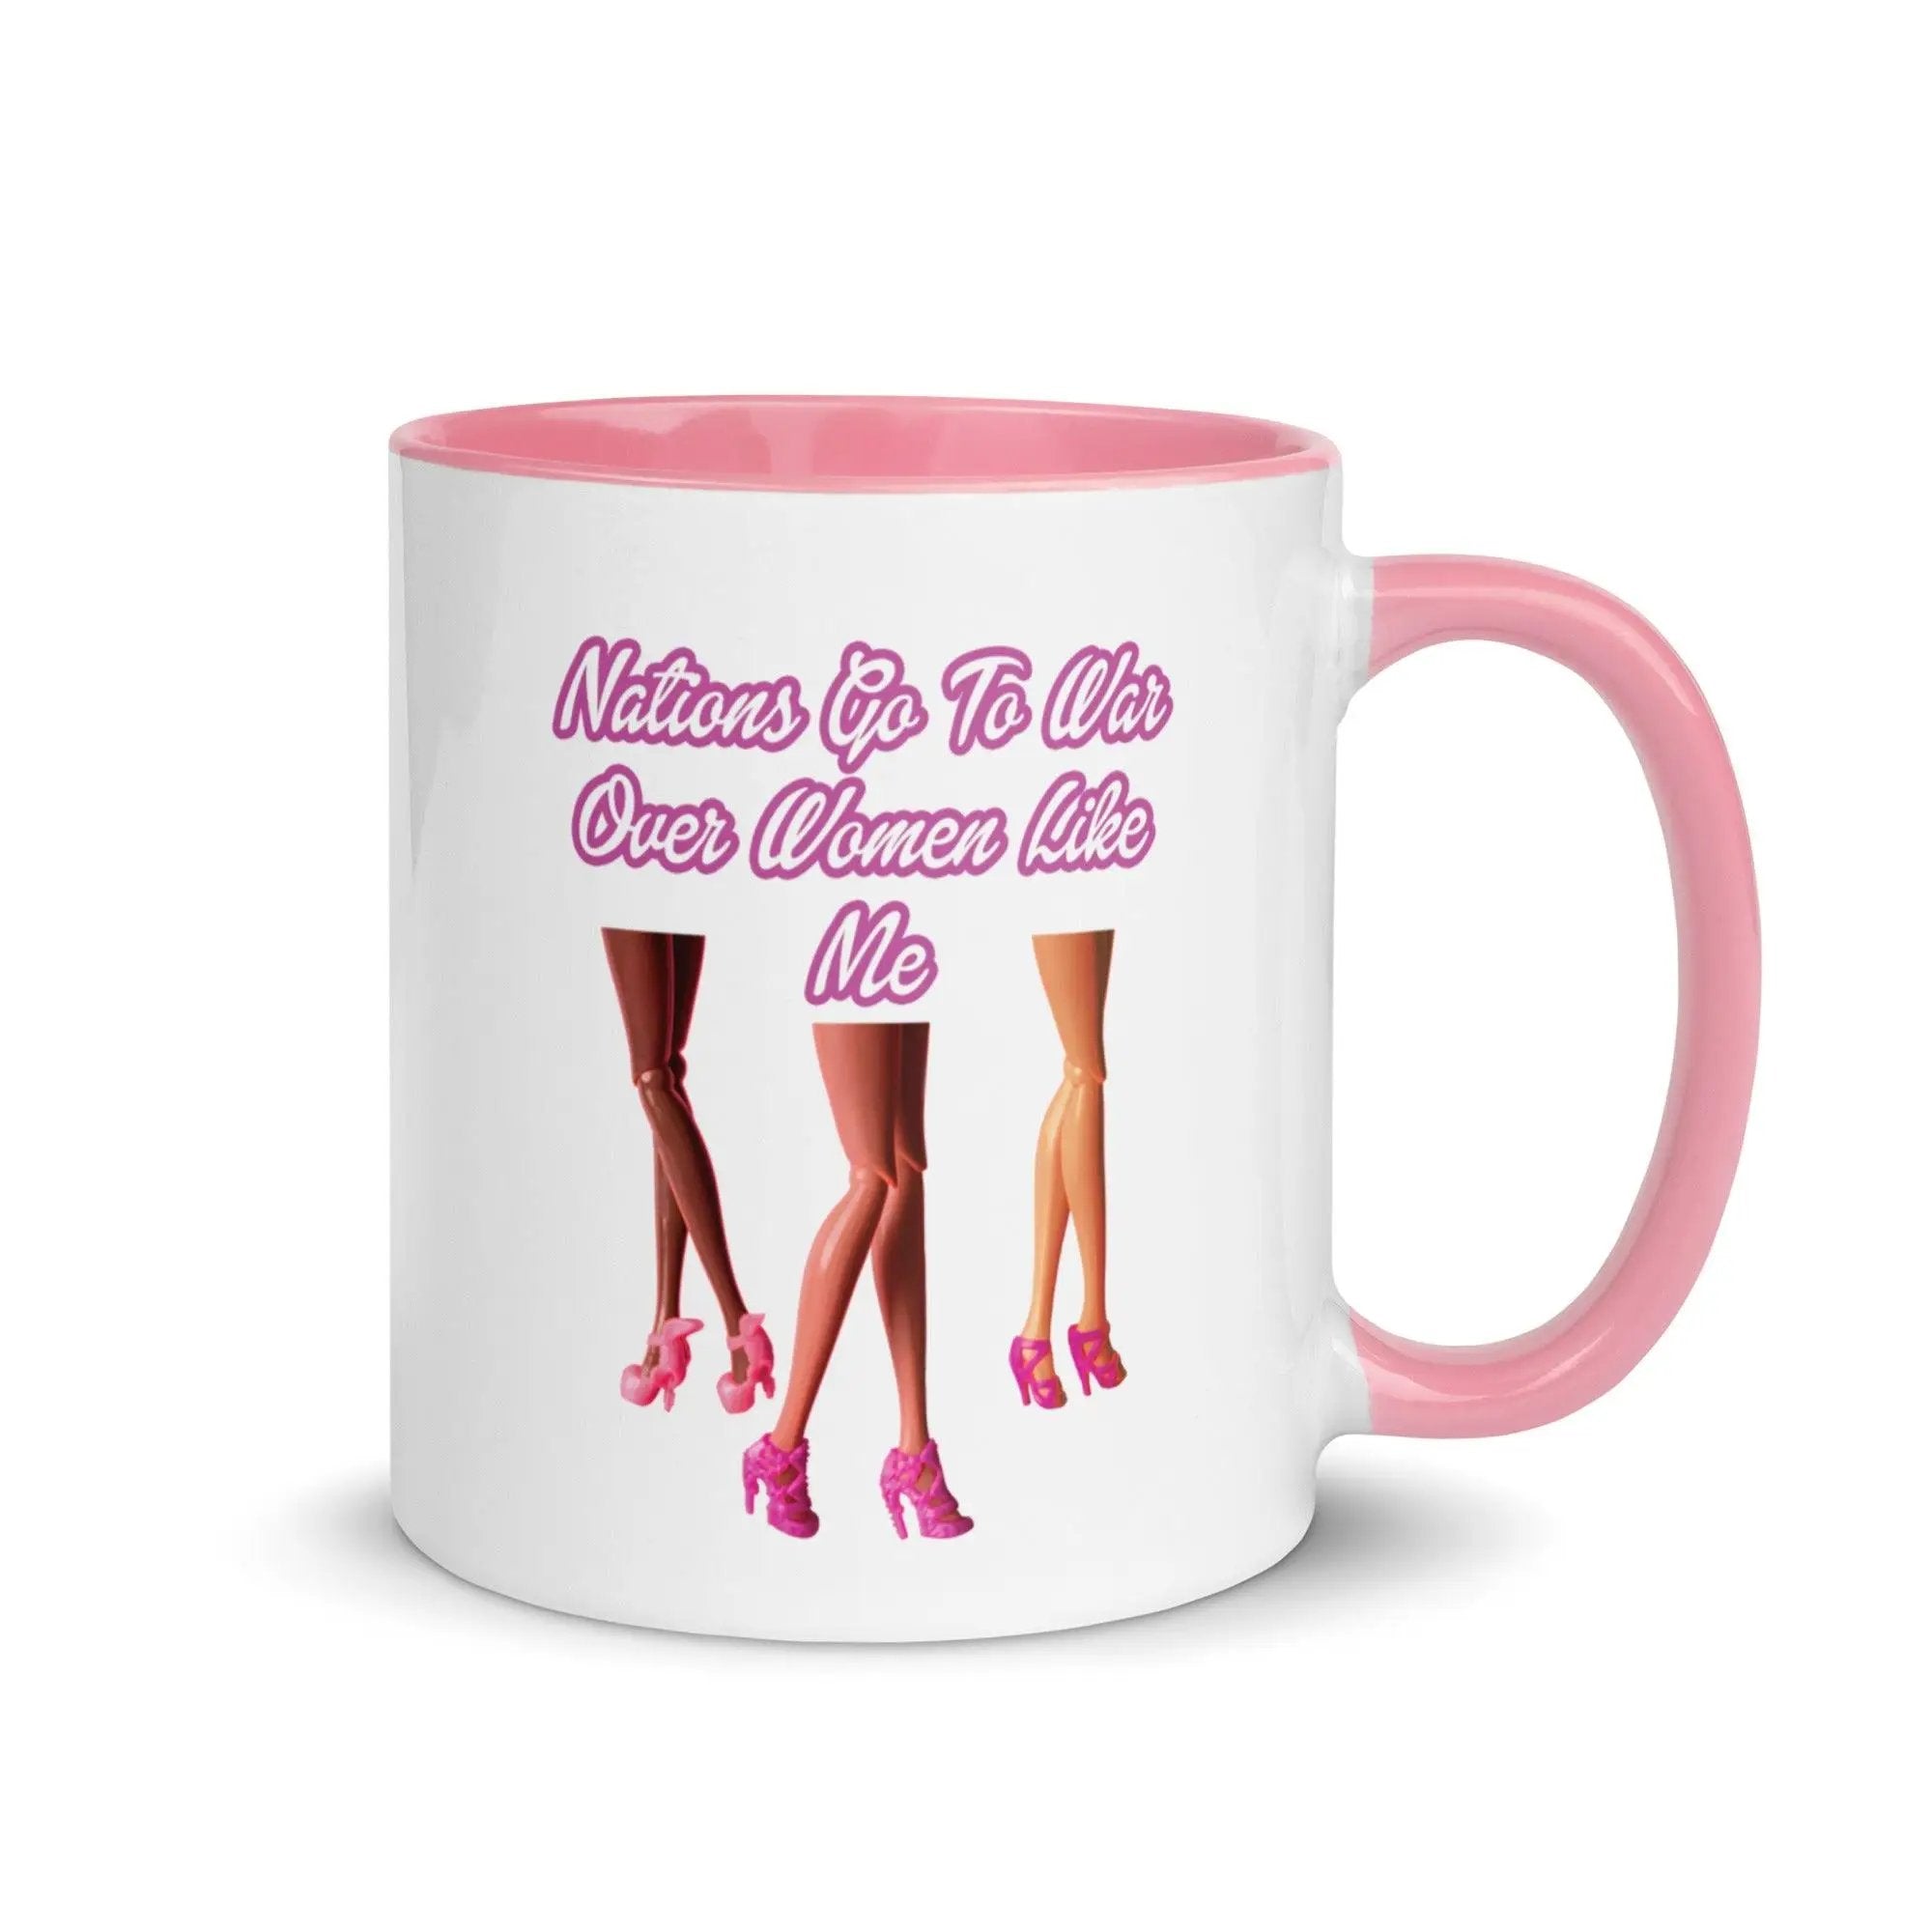 Nations Go To War Over Women Like Me Mug with Color Inside VAWDesigns